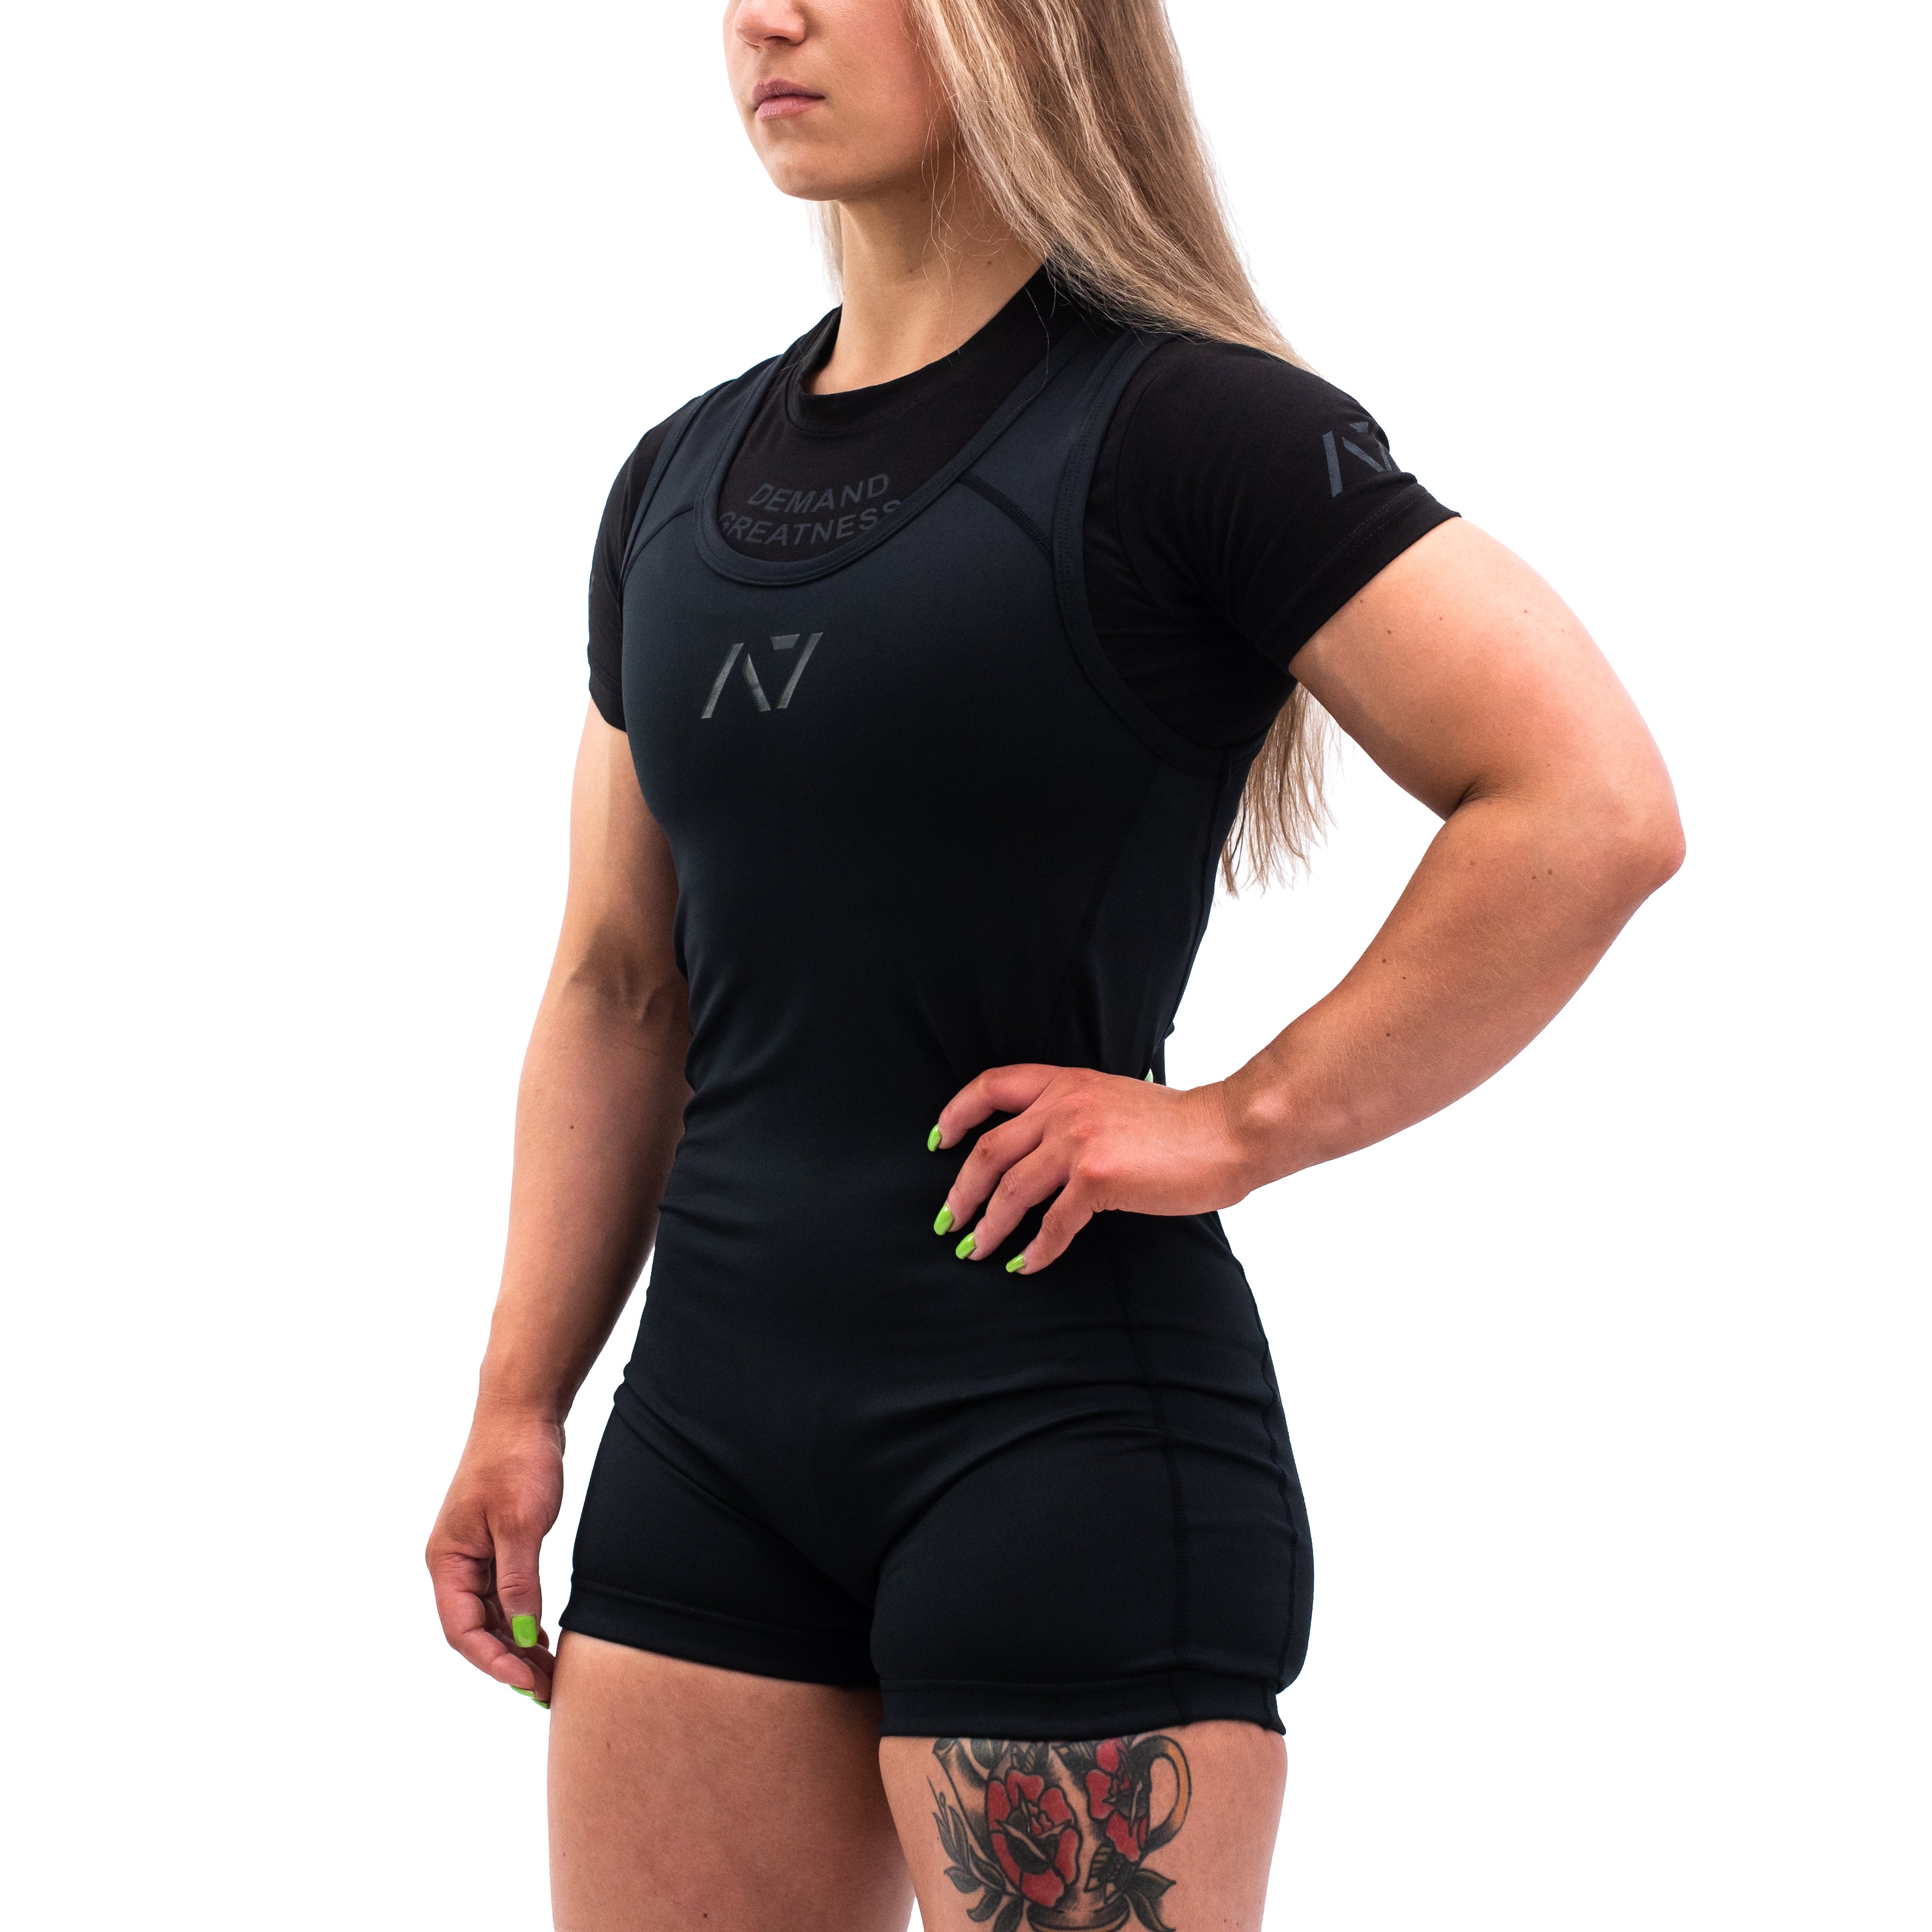 A7 Singlet - Stealth - IPF Approved - A7